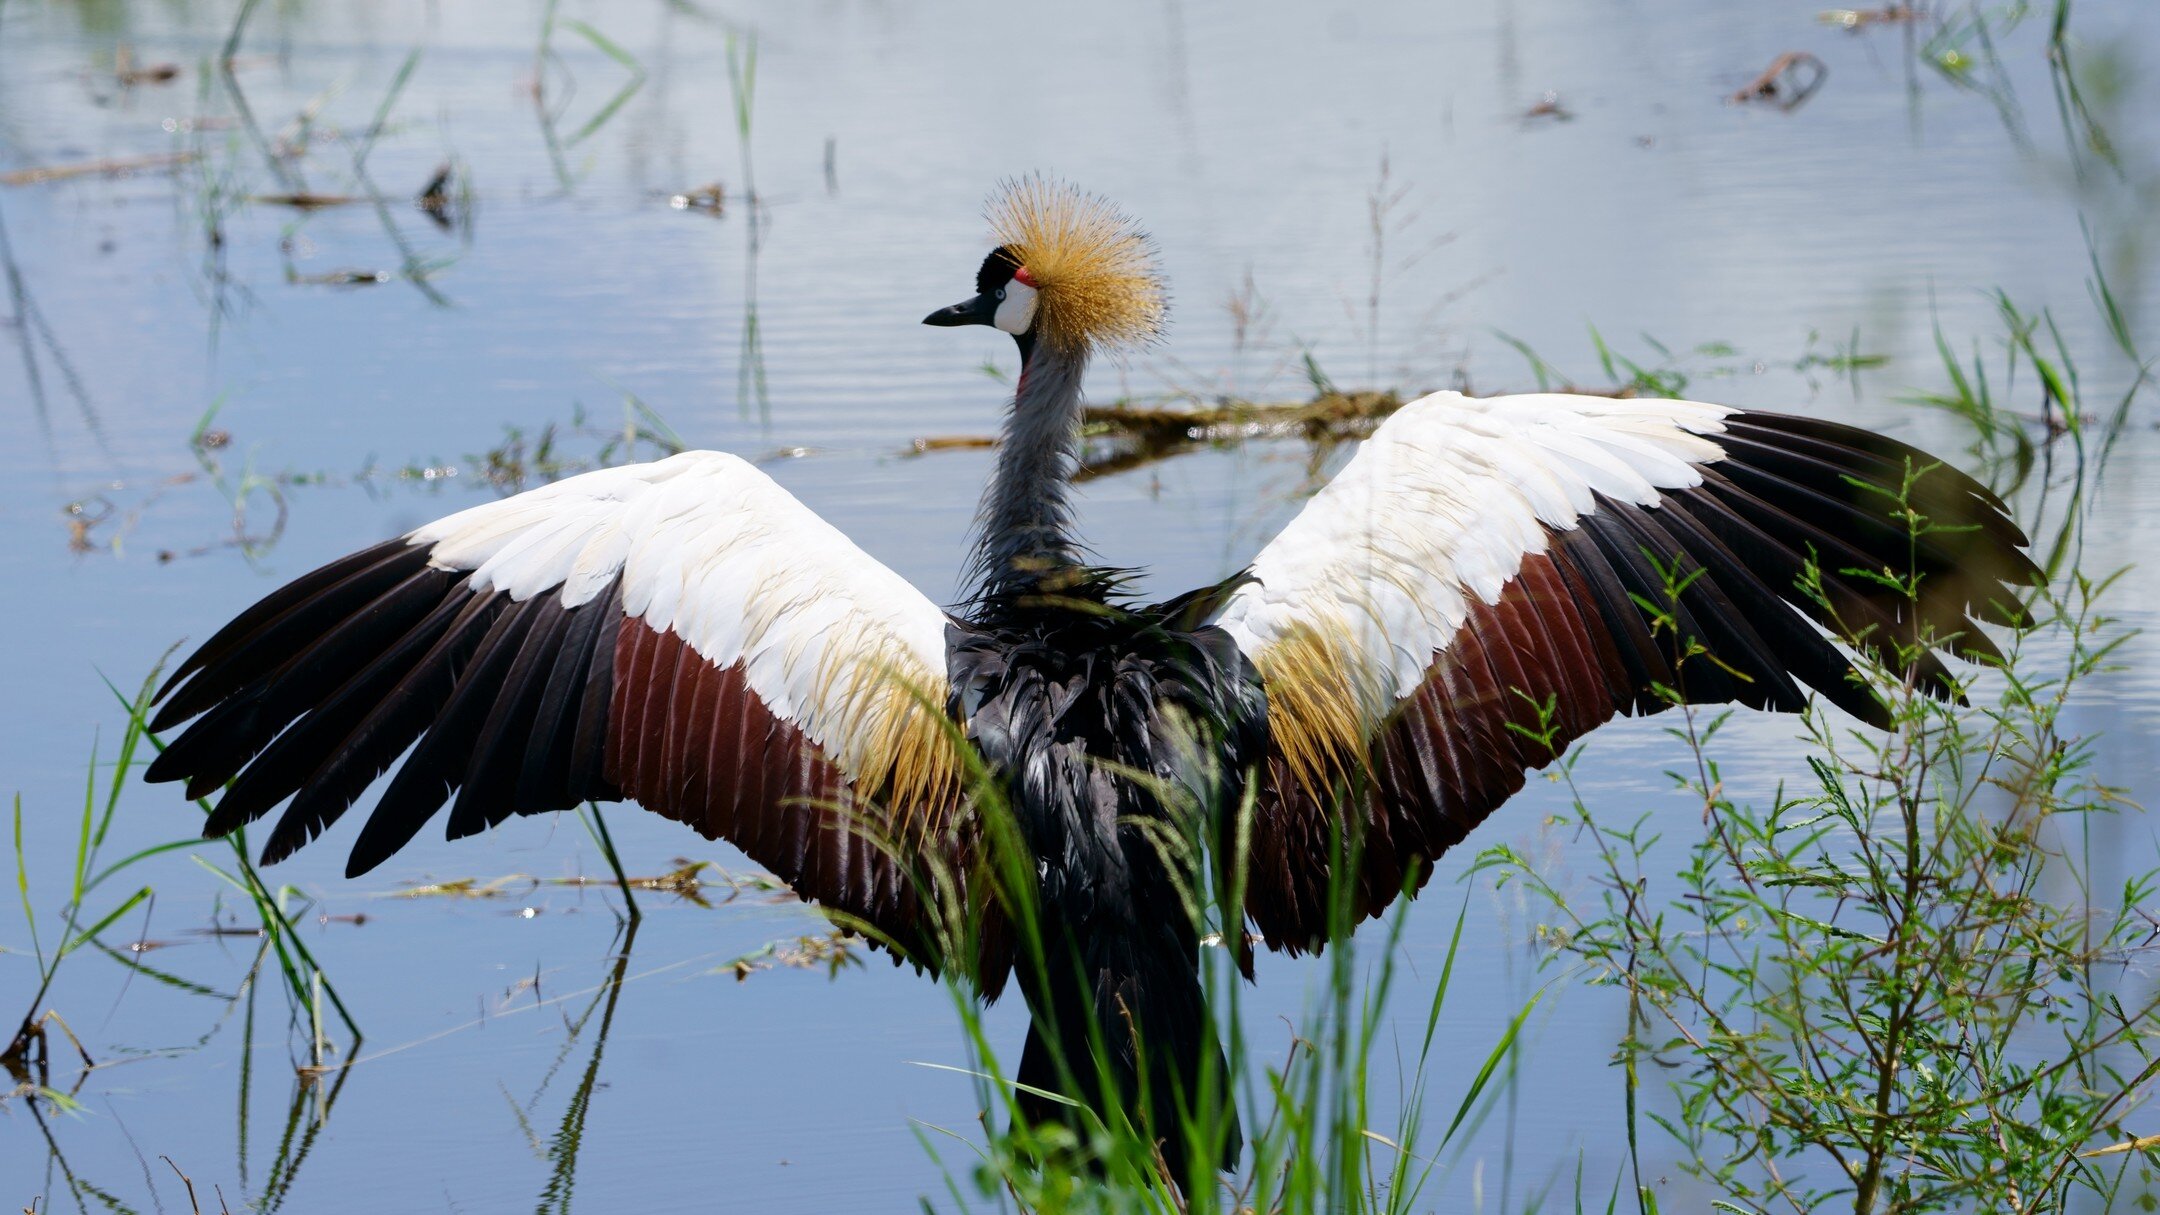 Check out this beautiful Grey crowned crane from a March safari. This bird occurs from Kenya to South Africa and is the national bird of Uganda, appearing on its flag. #crownedcrane #uganda #safari #wings